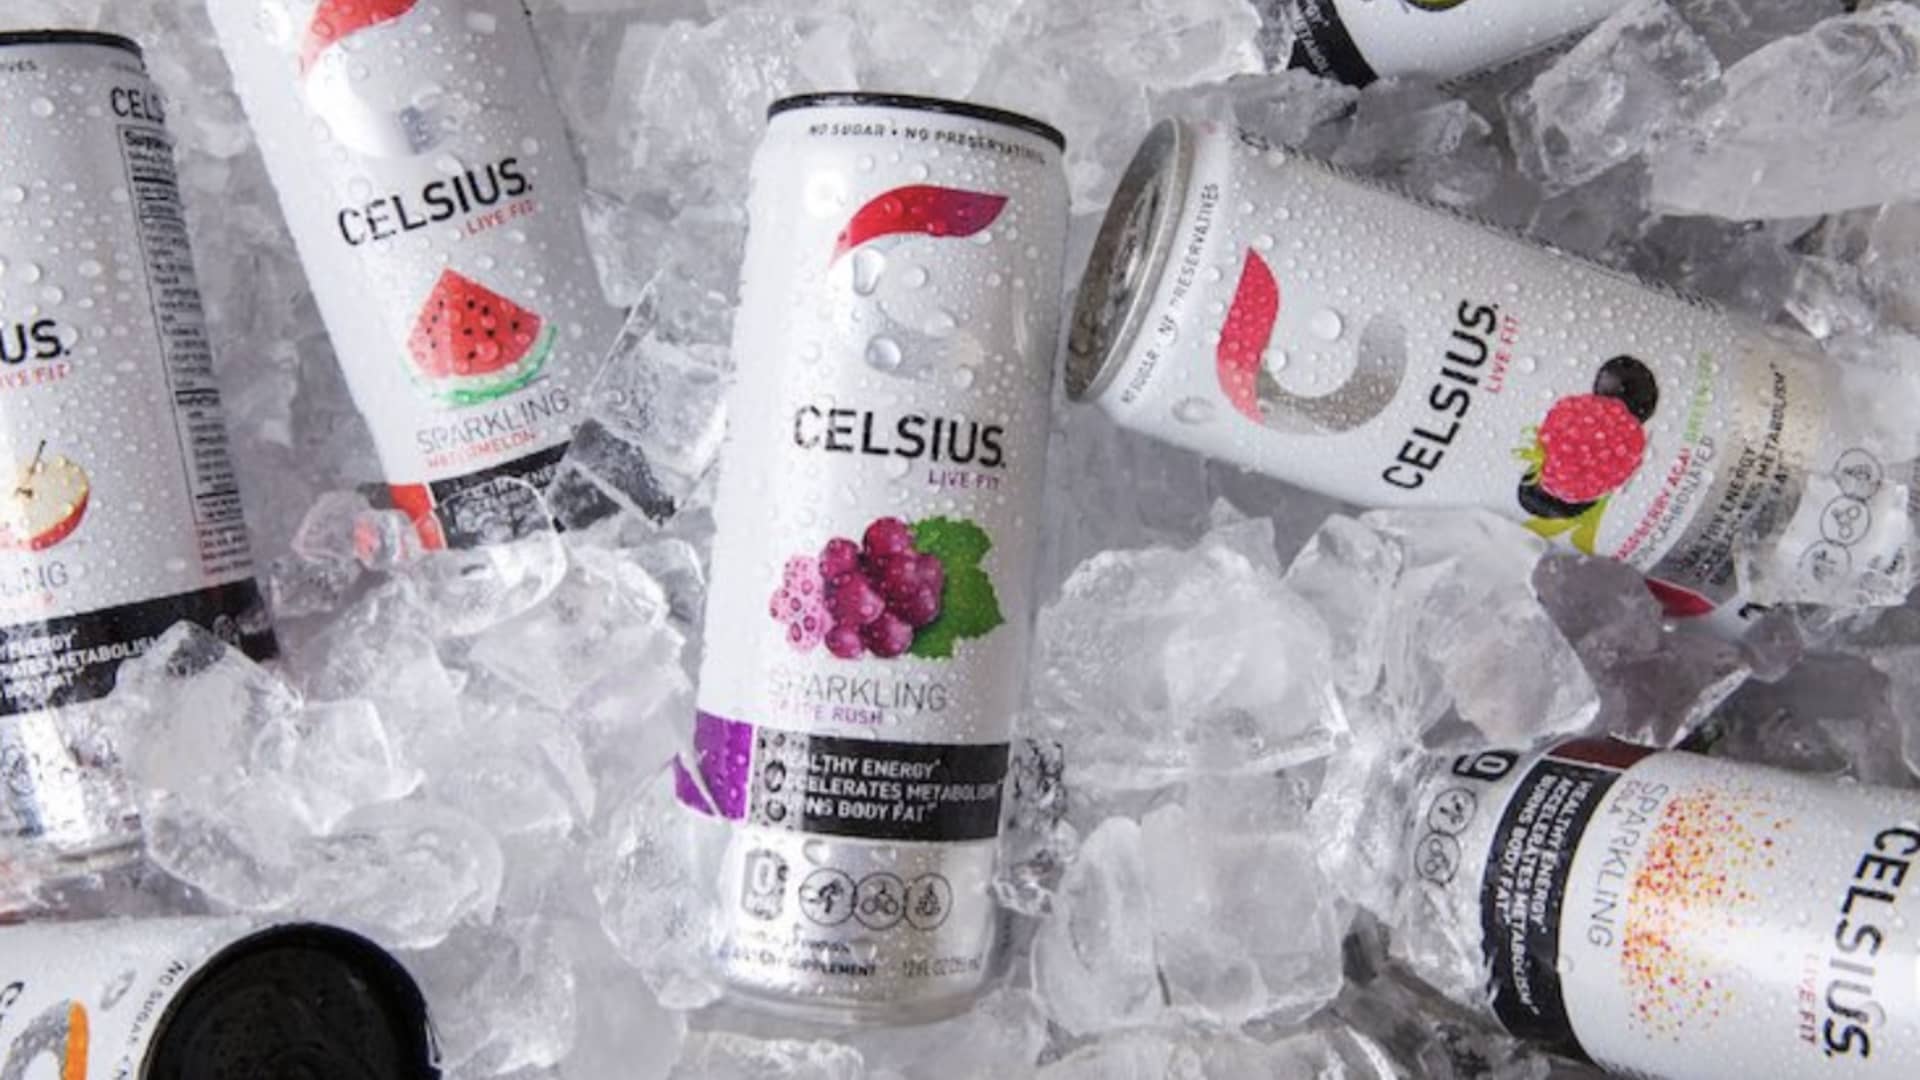 An invigorating can of Celsius Energy Drink, showcasing a citrus-flavored carbonated beverage on a white table.